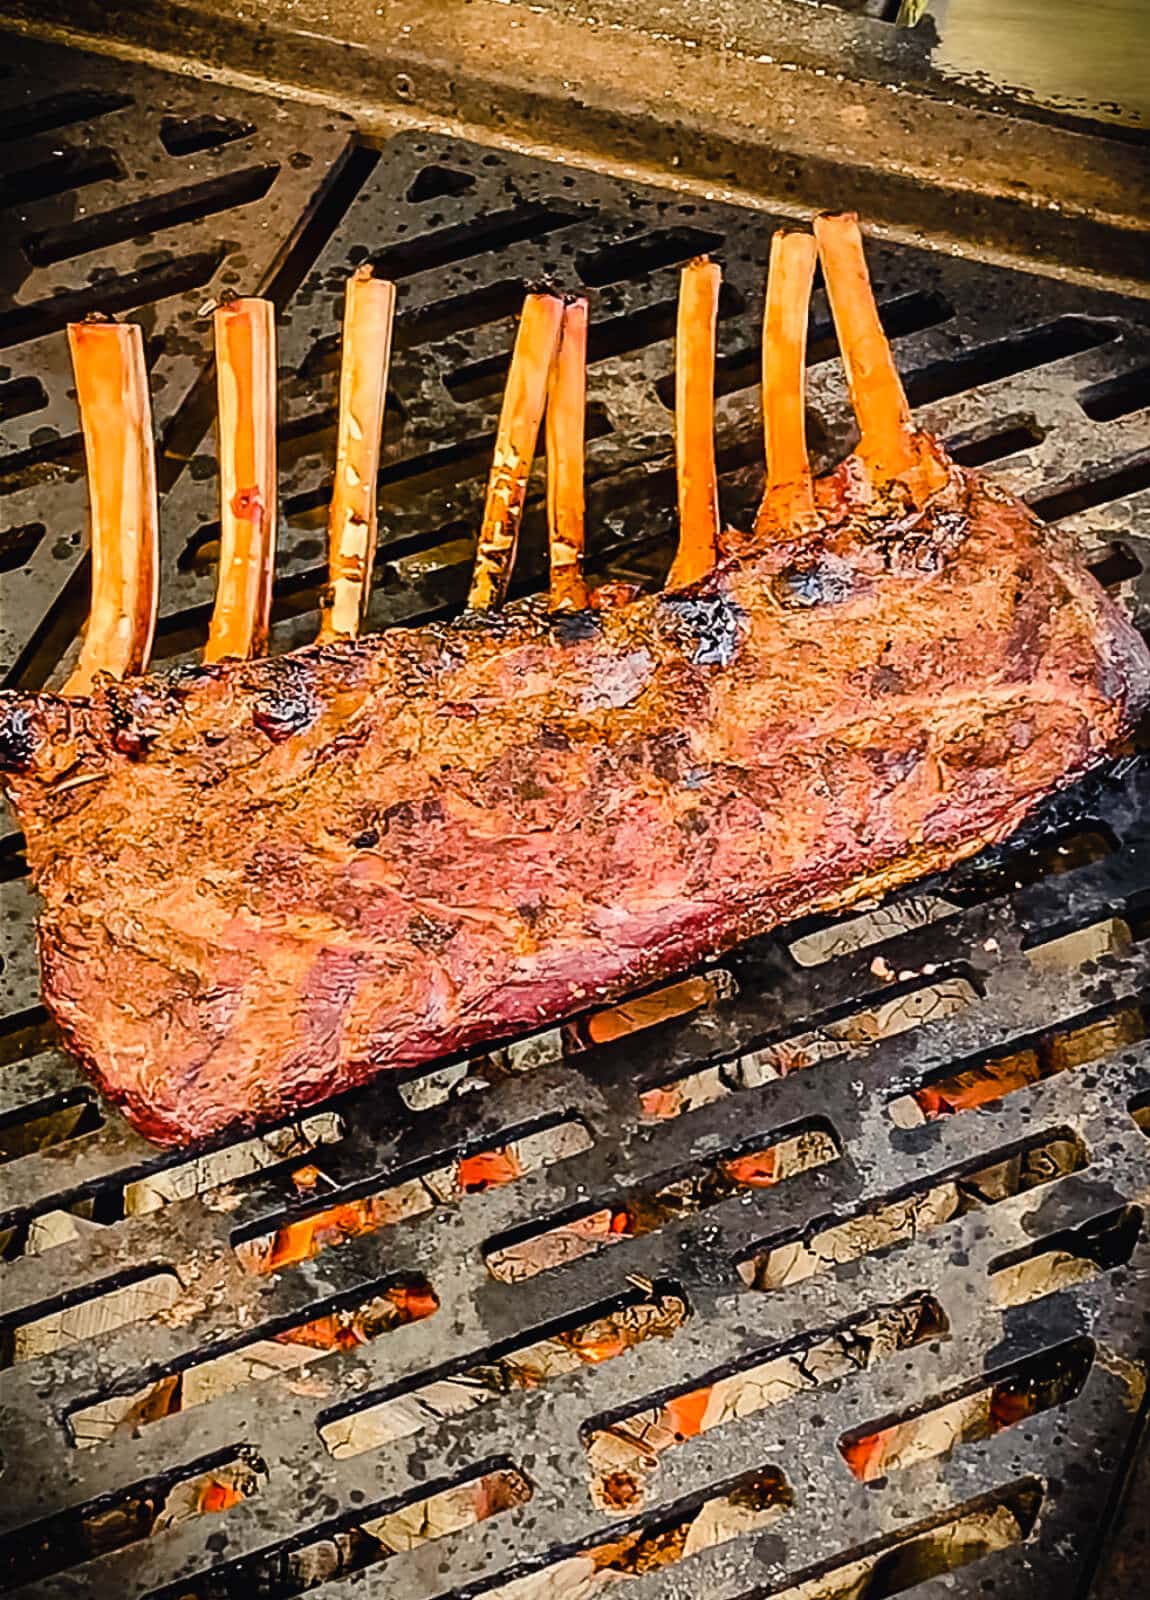 venison rack searing on a grill